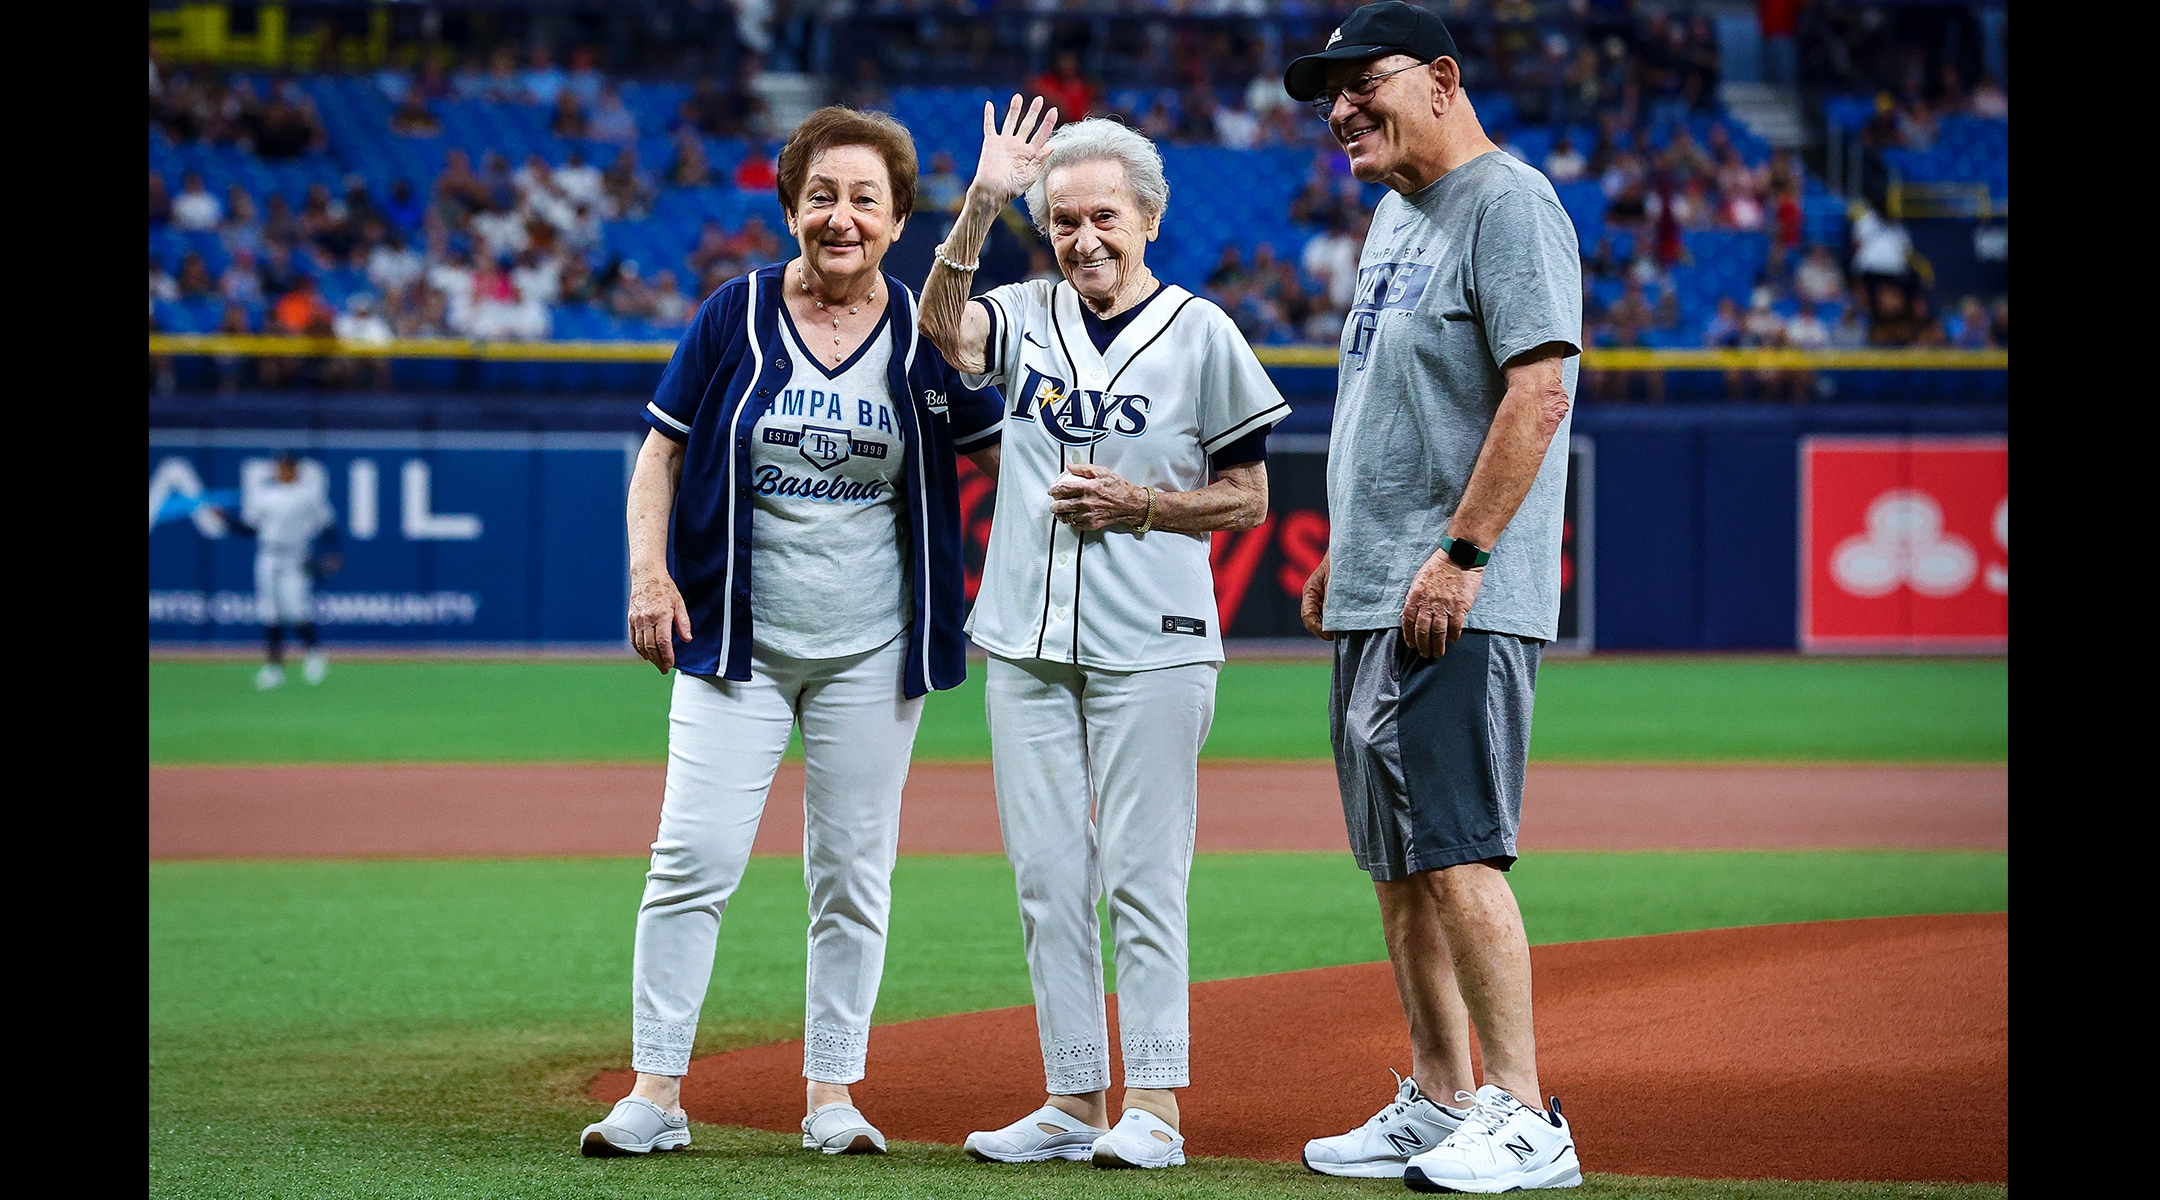 Helen Kahan, center, with her daughter Livia Wein and son Lucian Kahan. (Courtesy of the Tampa Bay Rays)